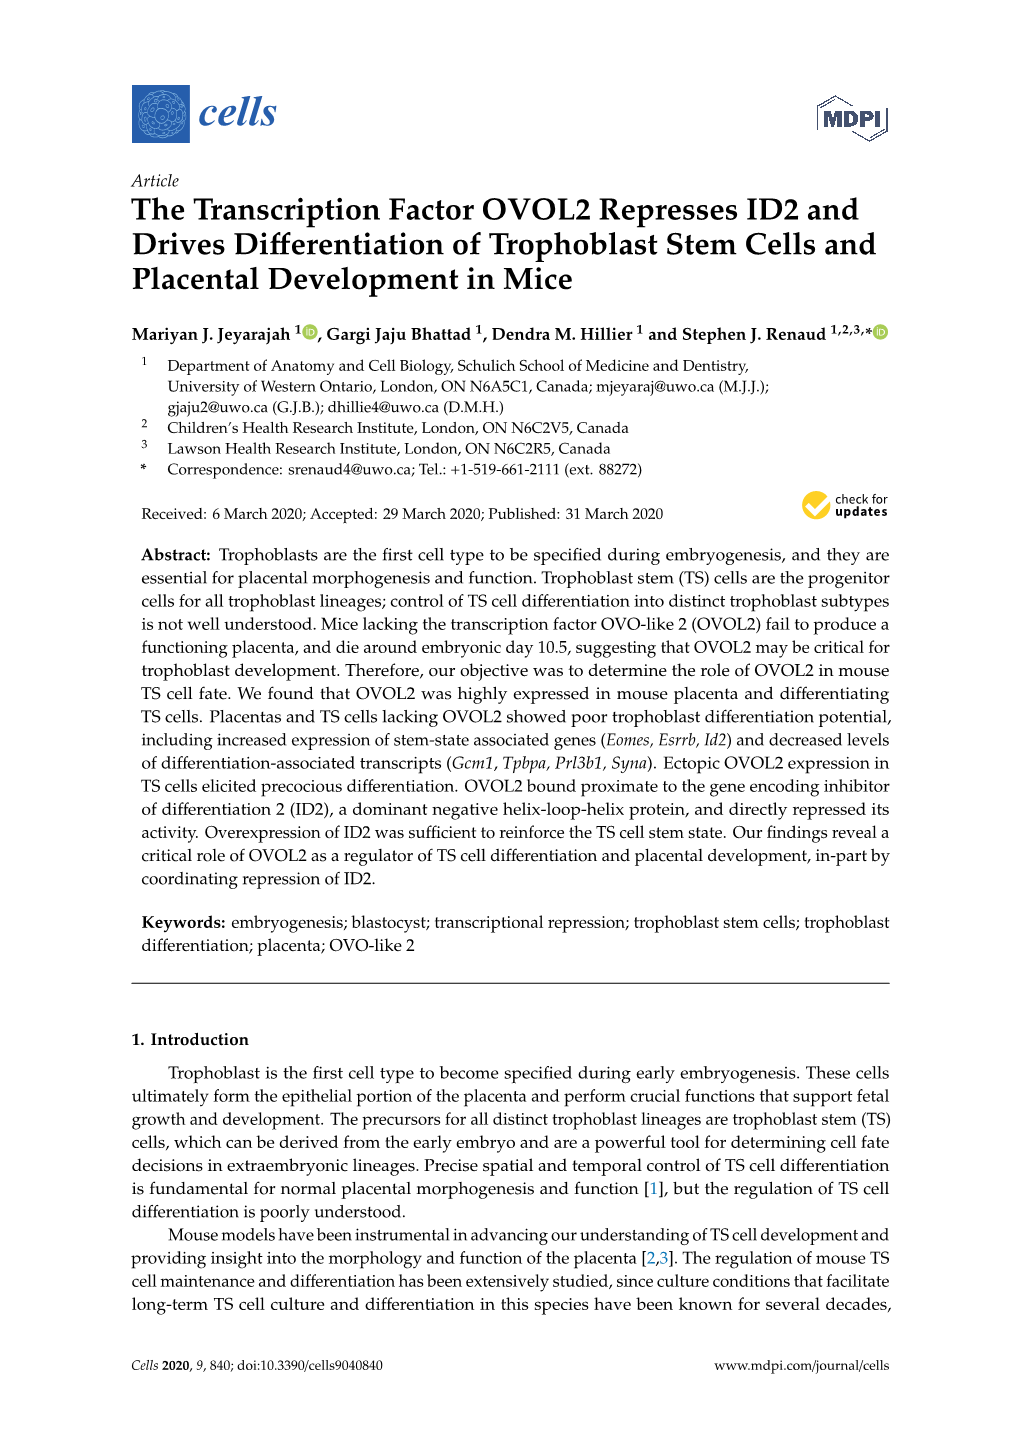 The Transcription Factor OVOL2 Represses ID2 and Drives Diﬀerentiation of Trophoblast Stem Cells and Placental Development in Mice